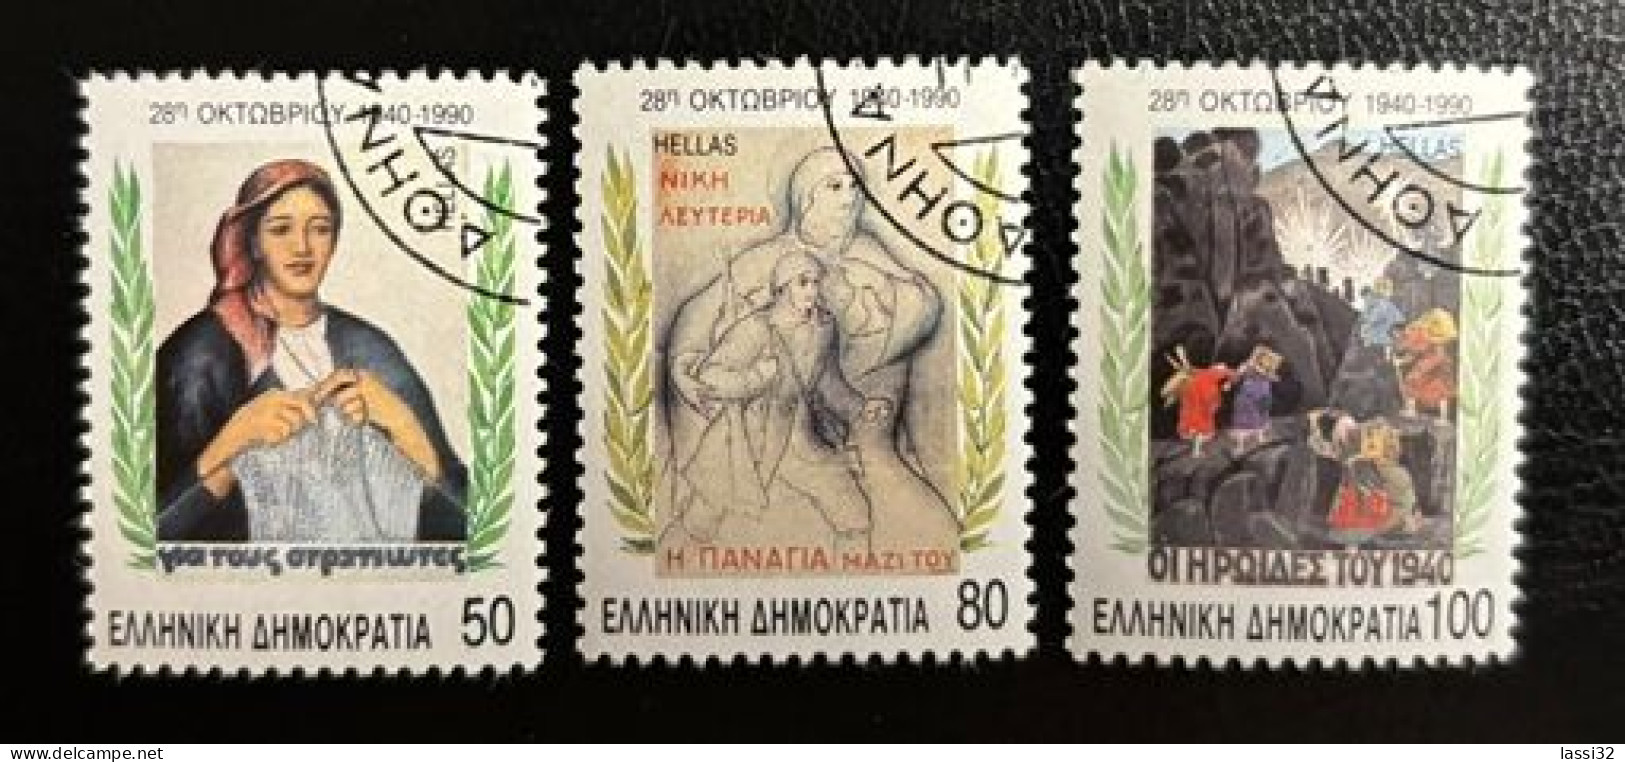 GREECE,1990. 50th ANNIVERSARY OF "NO" OCTOBER 28th 1940, USED - Gebraucht